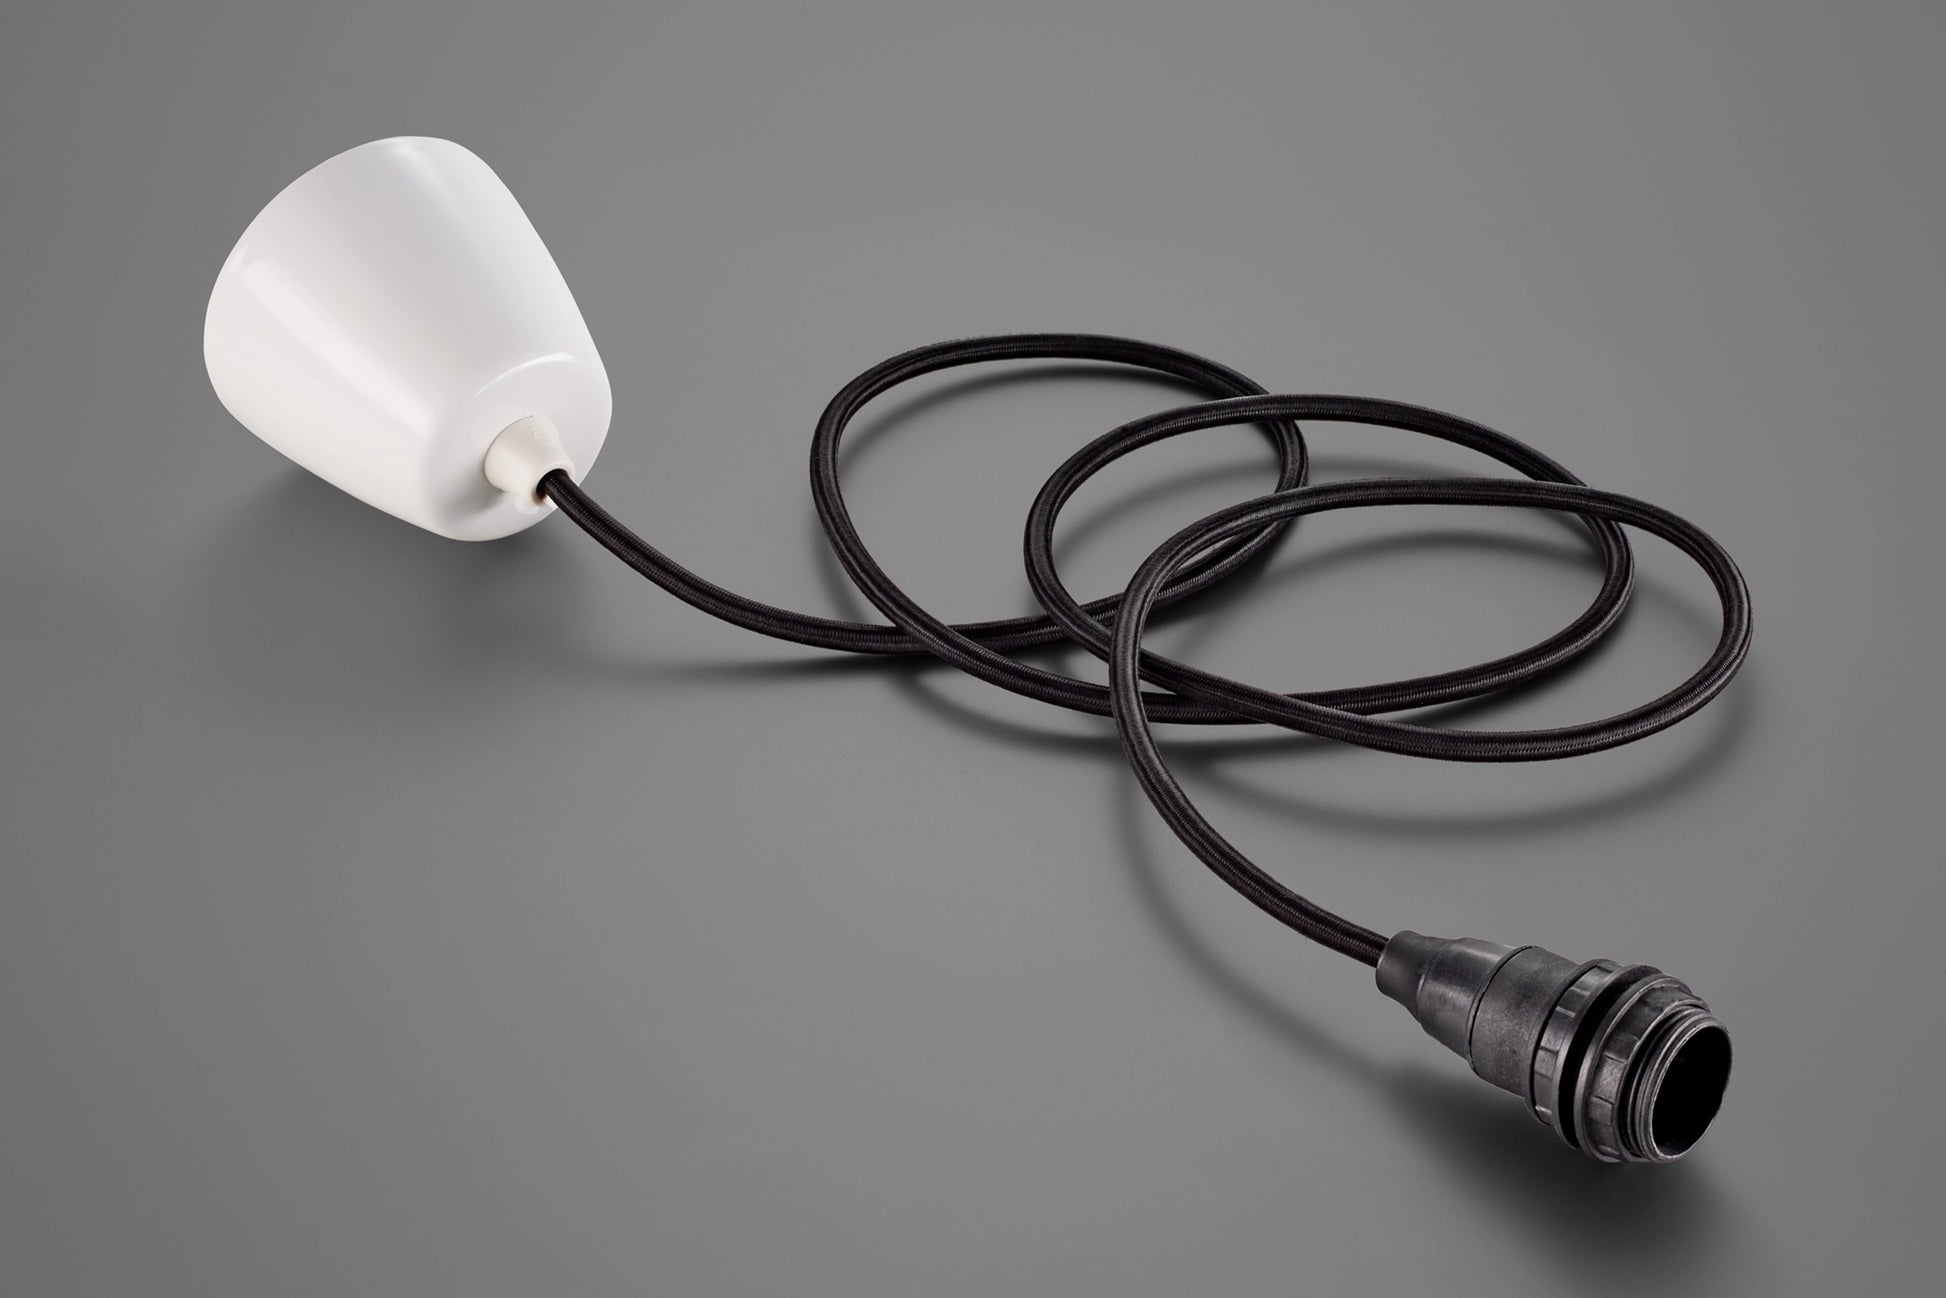 A Coolicon Industrial Bakelite pendant set with a white Vitreous Enamel ceiling cup and black cable